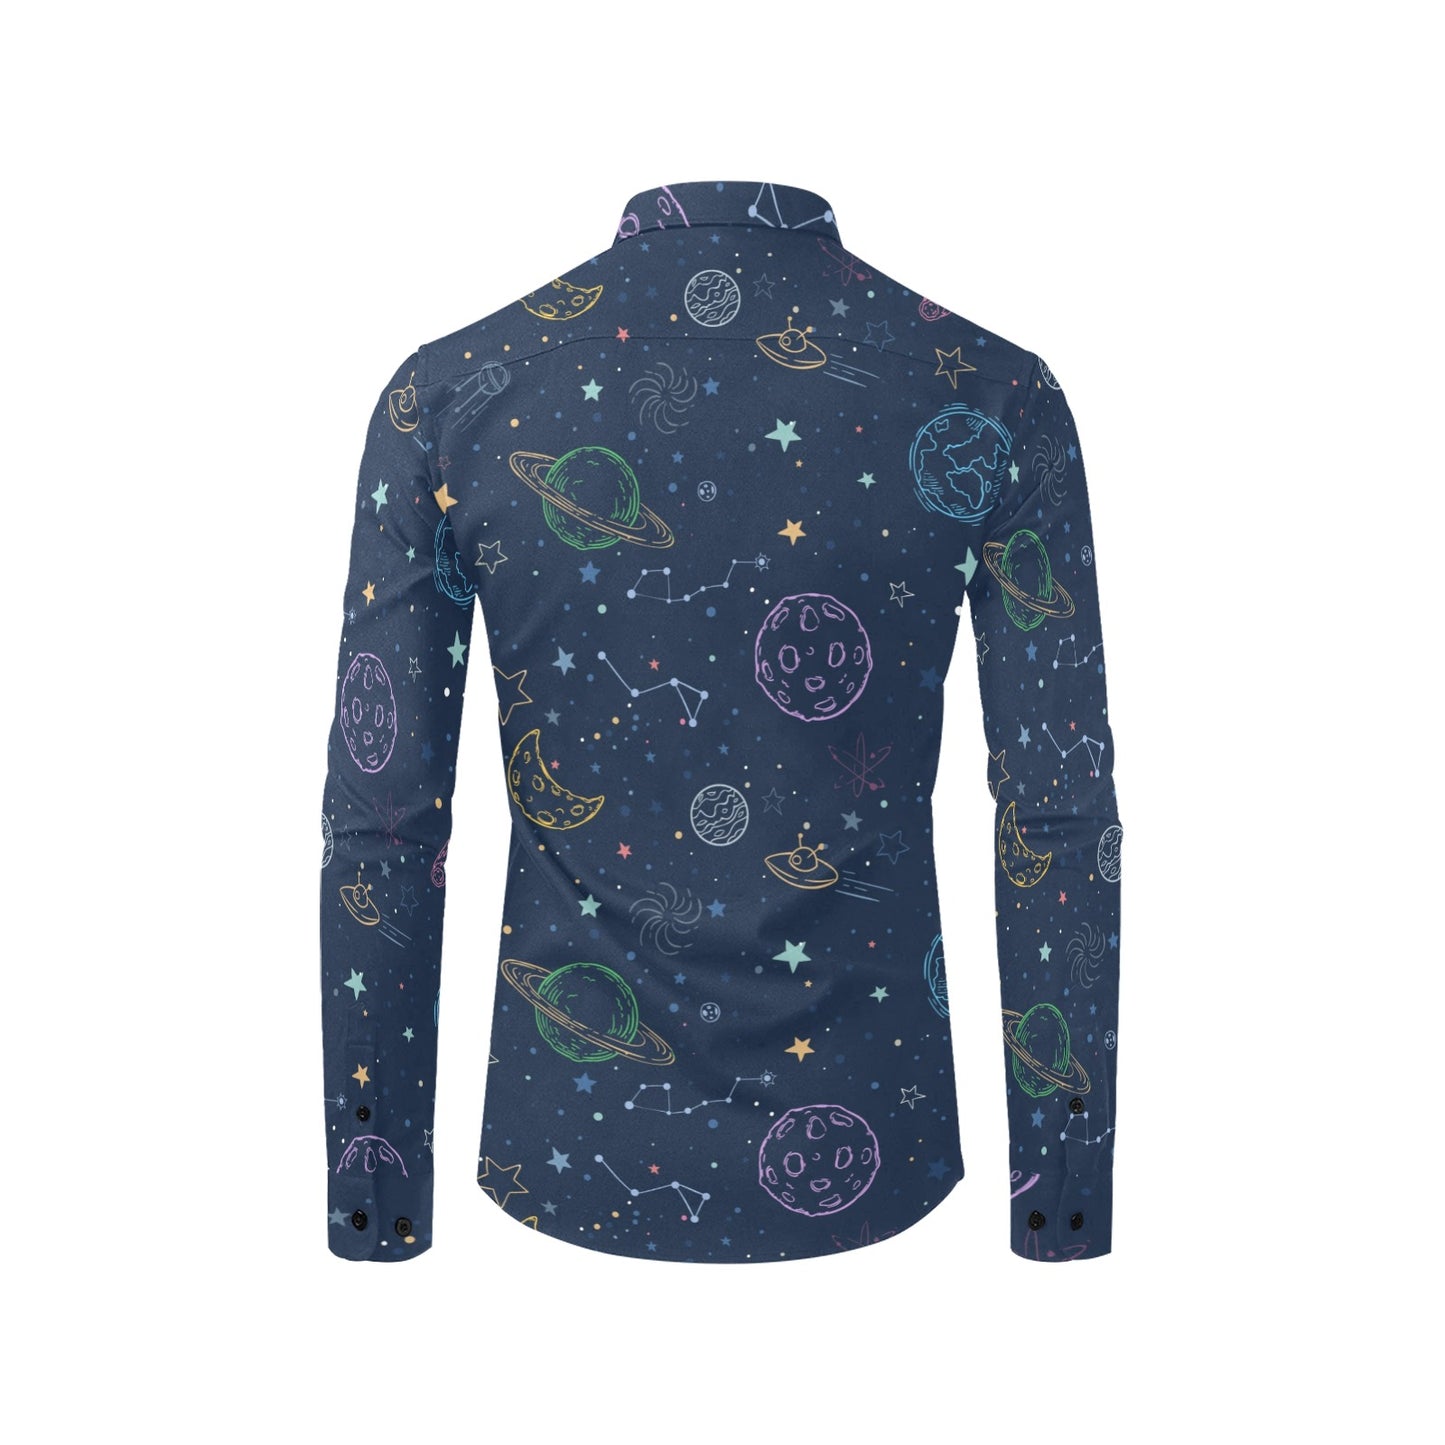 Planets Long Sleeve Men Button Up Shirt, Space Stars Constellations Universe Cosmos Print Buttoned Collar Dress Shirt with Chest Pocket Starcove Fashion